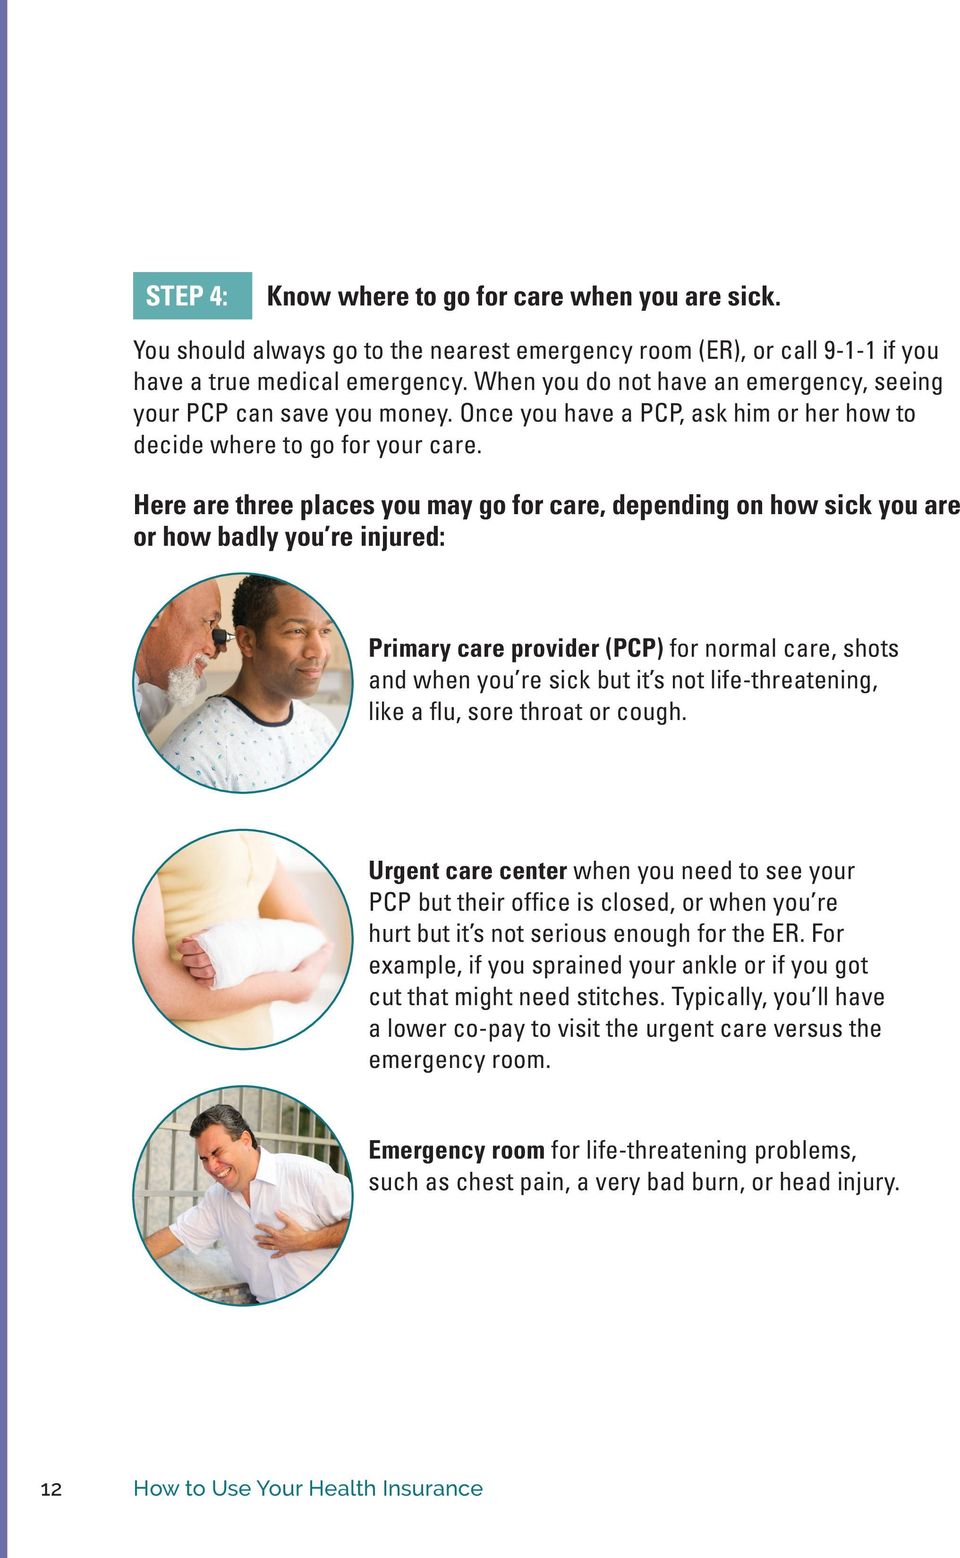 Here are three places you may go for care, depending on how sick you are or how badly you re injured: Primary care provider (PCP) for normal care, shots and when you re sick but it s not